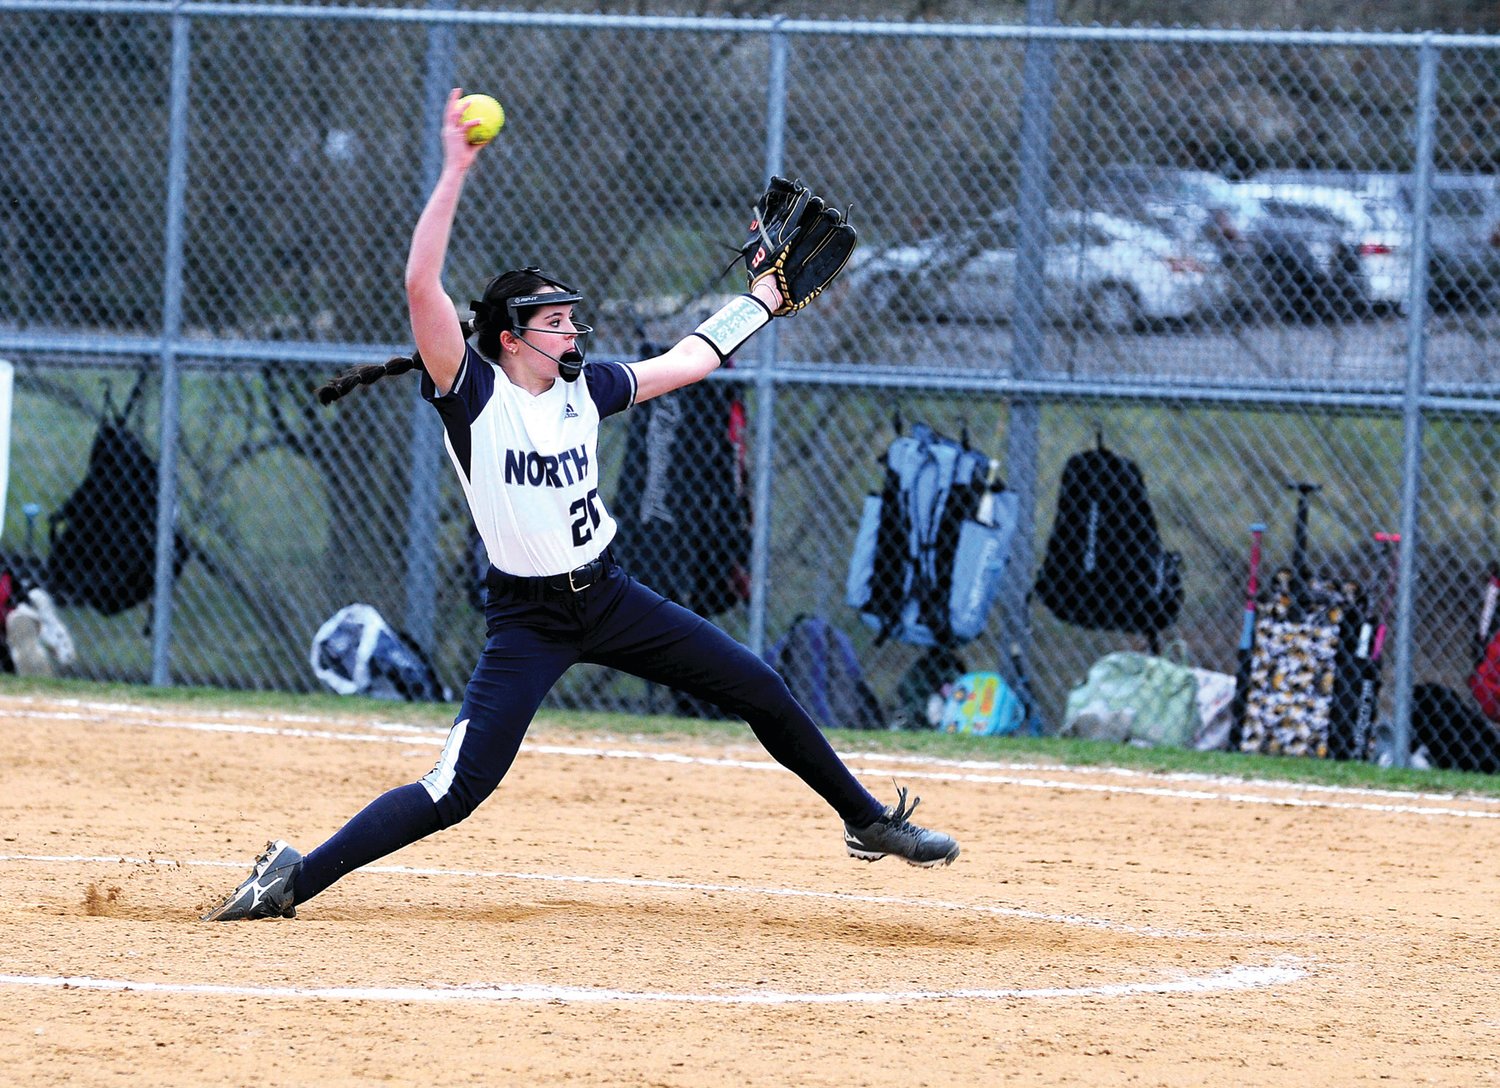 Council Rock North freshman Lucy Mills pitched the last 4 and 2/3 innings to get the win over Villa Joseph Marie March 31 on the Indians' home field.